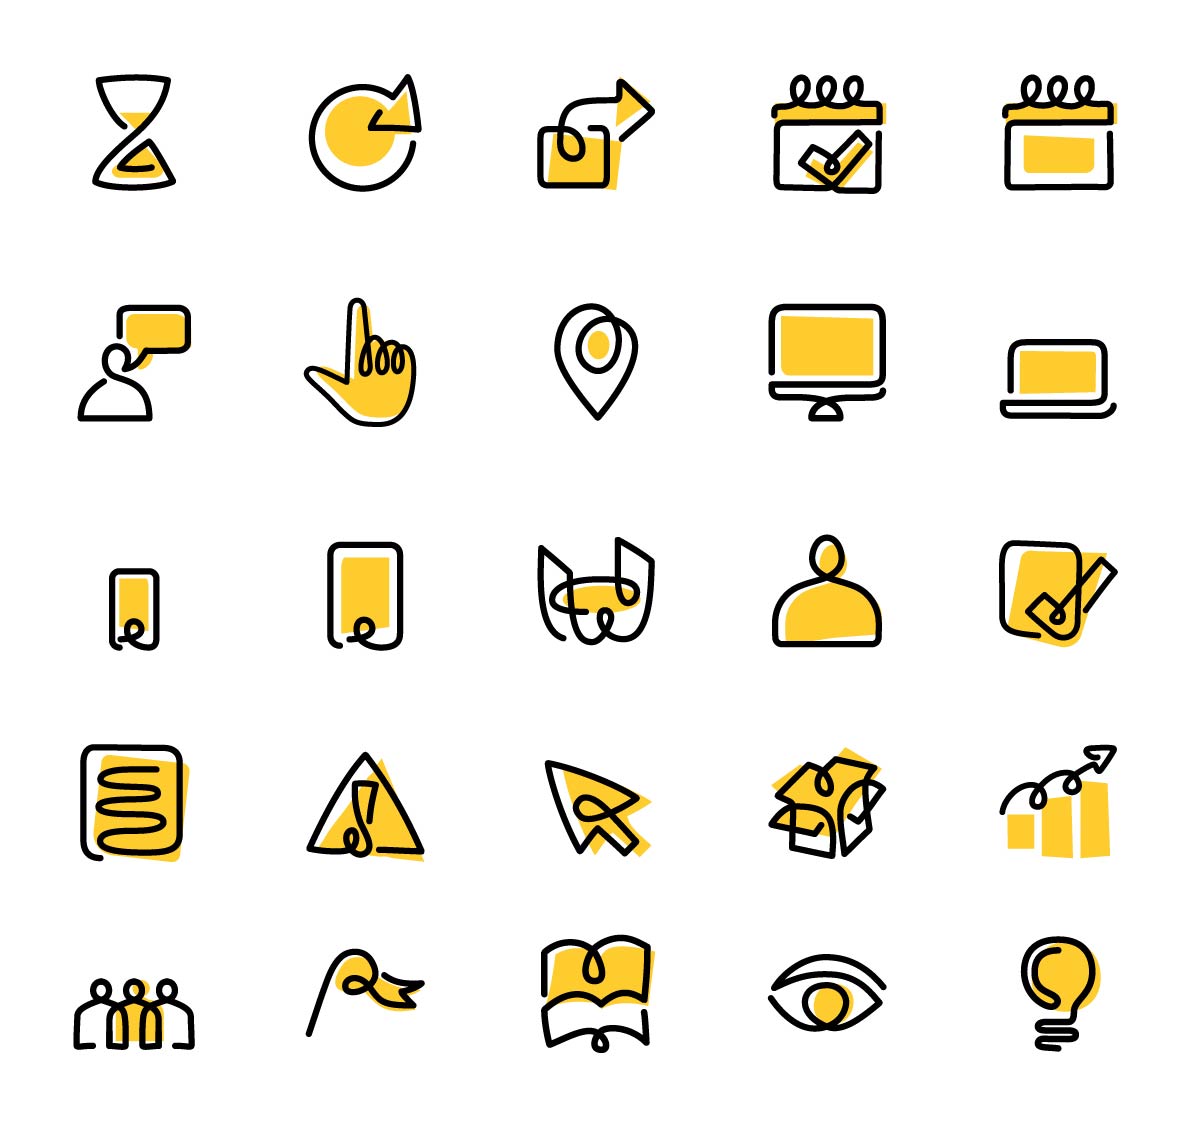 Yellow Pages new icons set 6 by Loogart